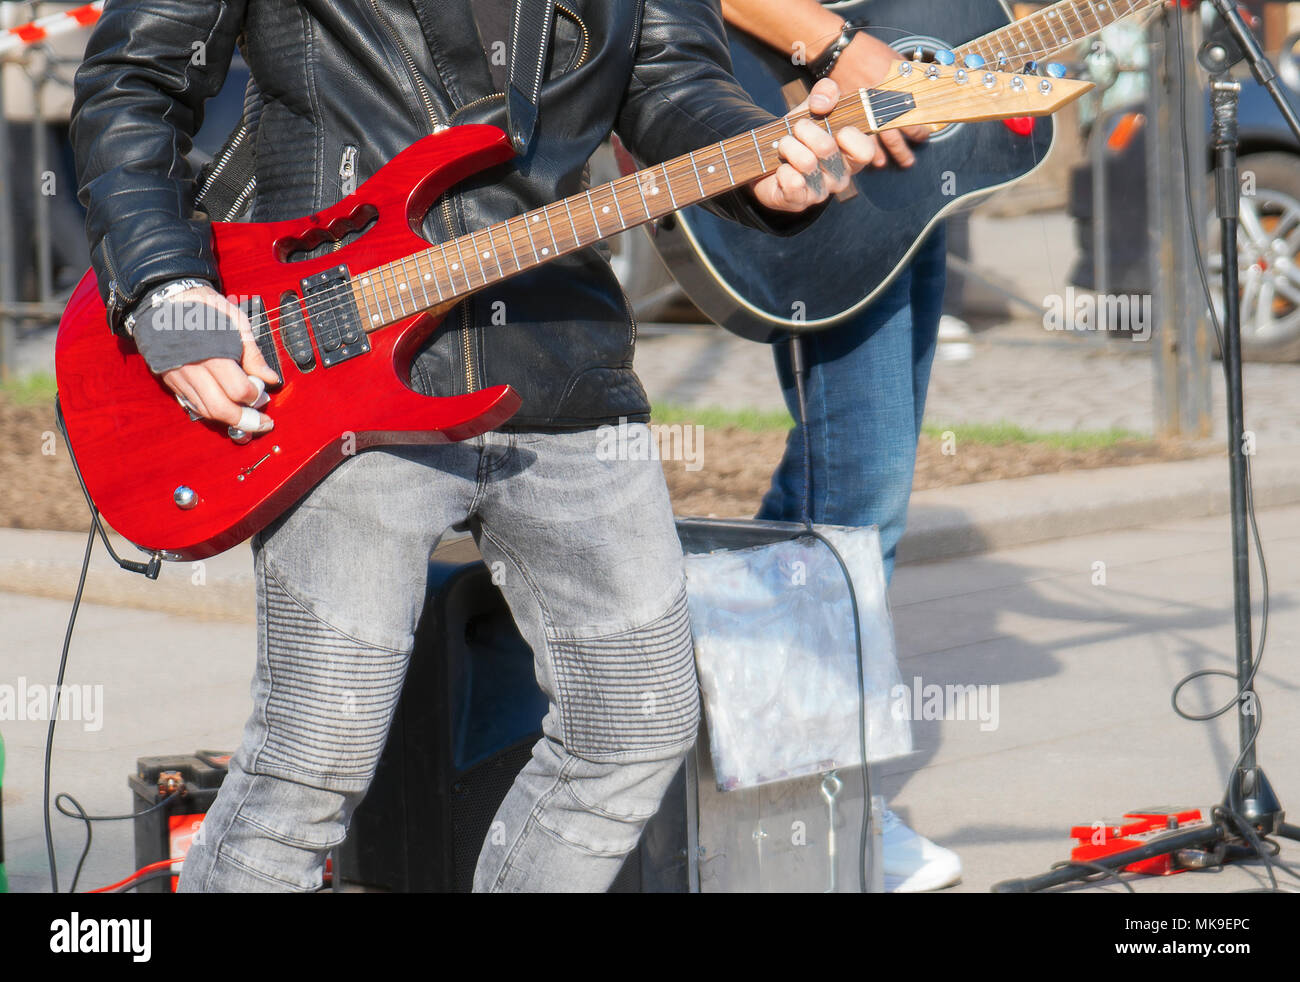 Street musicians playing on guitars. Unrecognizable persons. Stock Photo